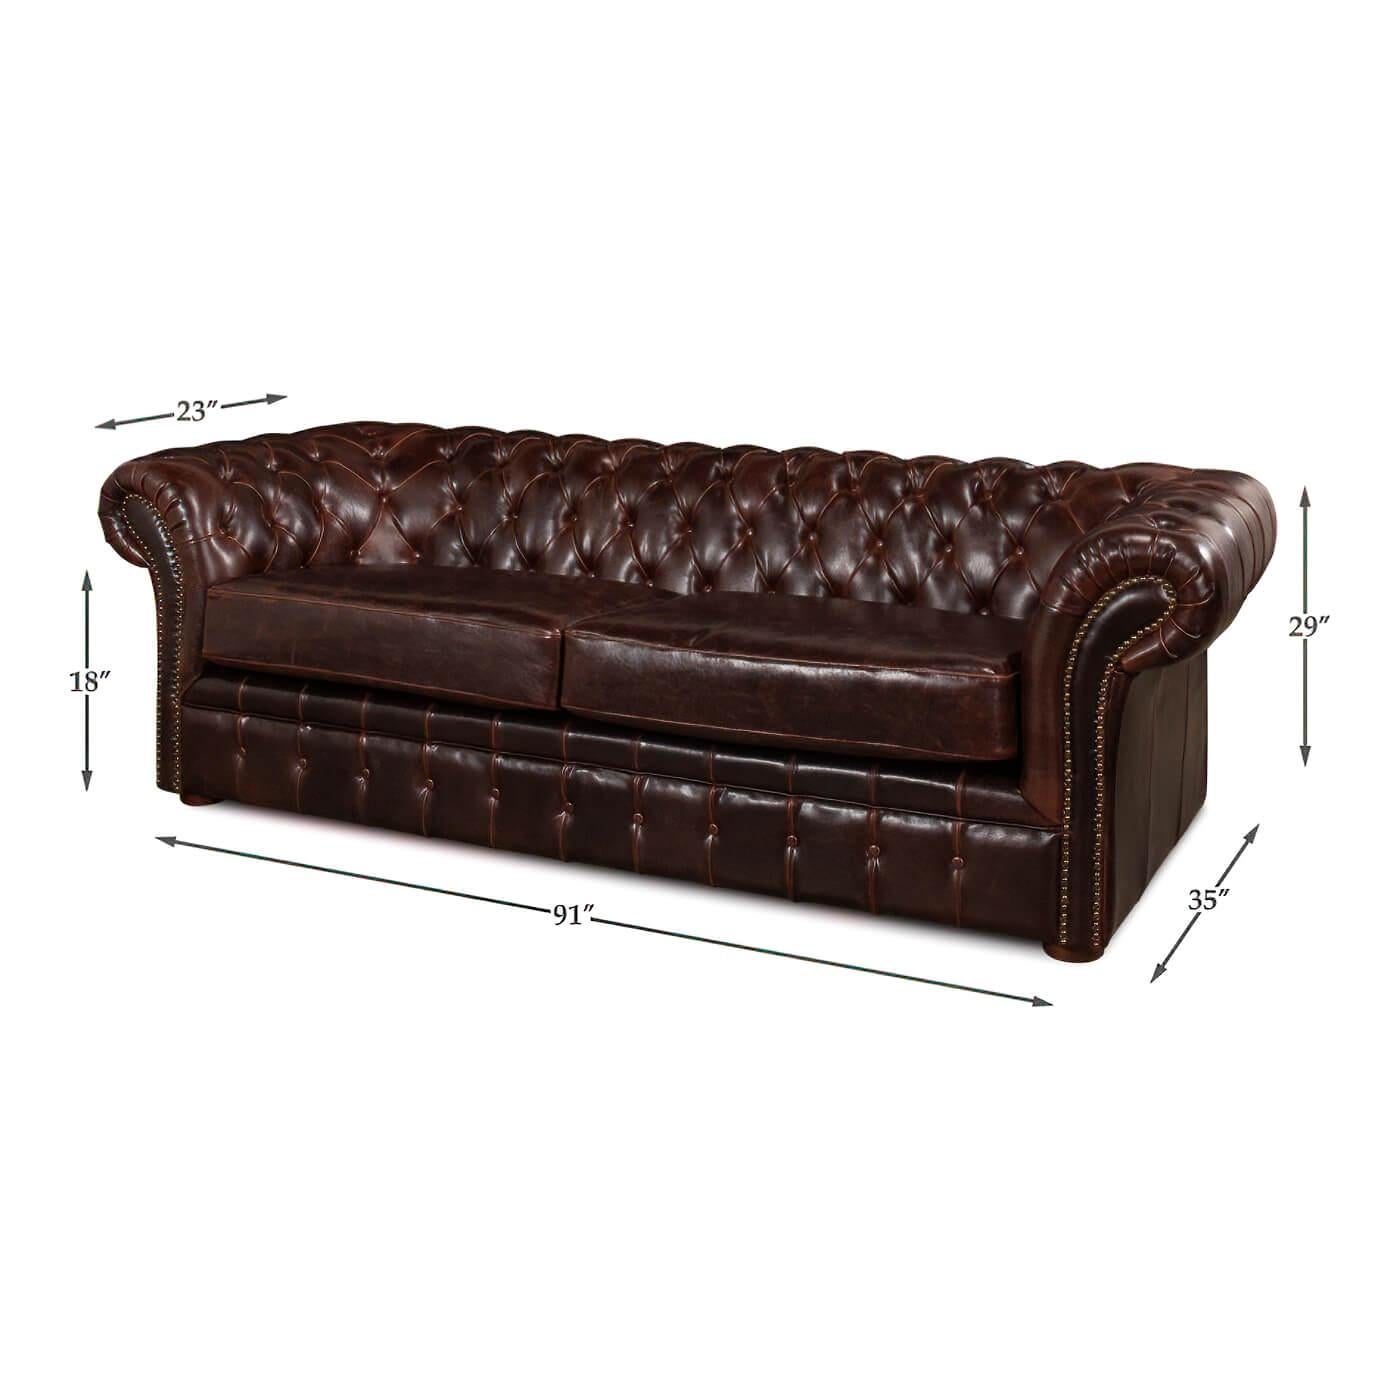 Tufted Leather Chesterfield Sofa For Sale 3